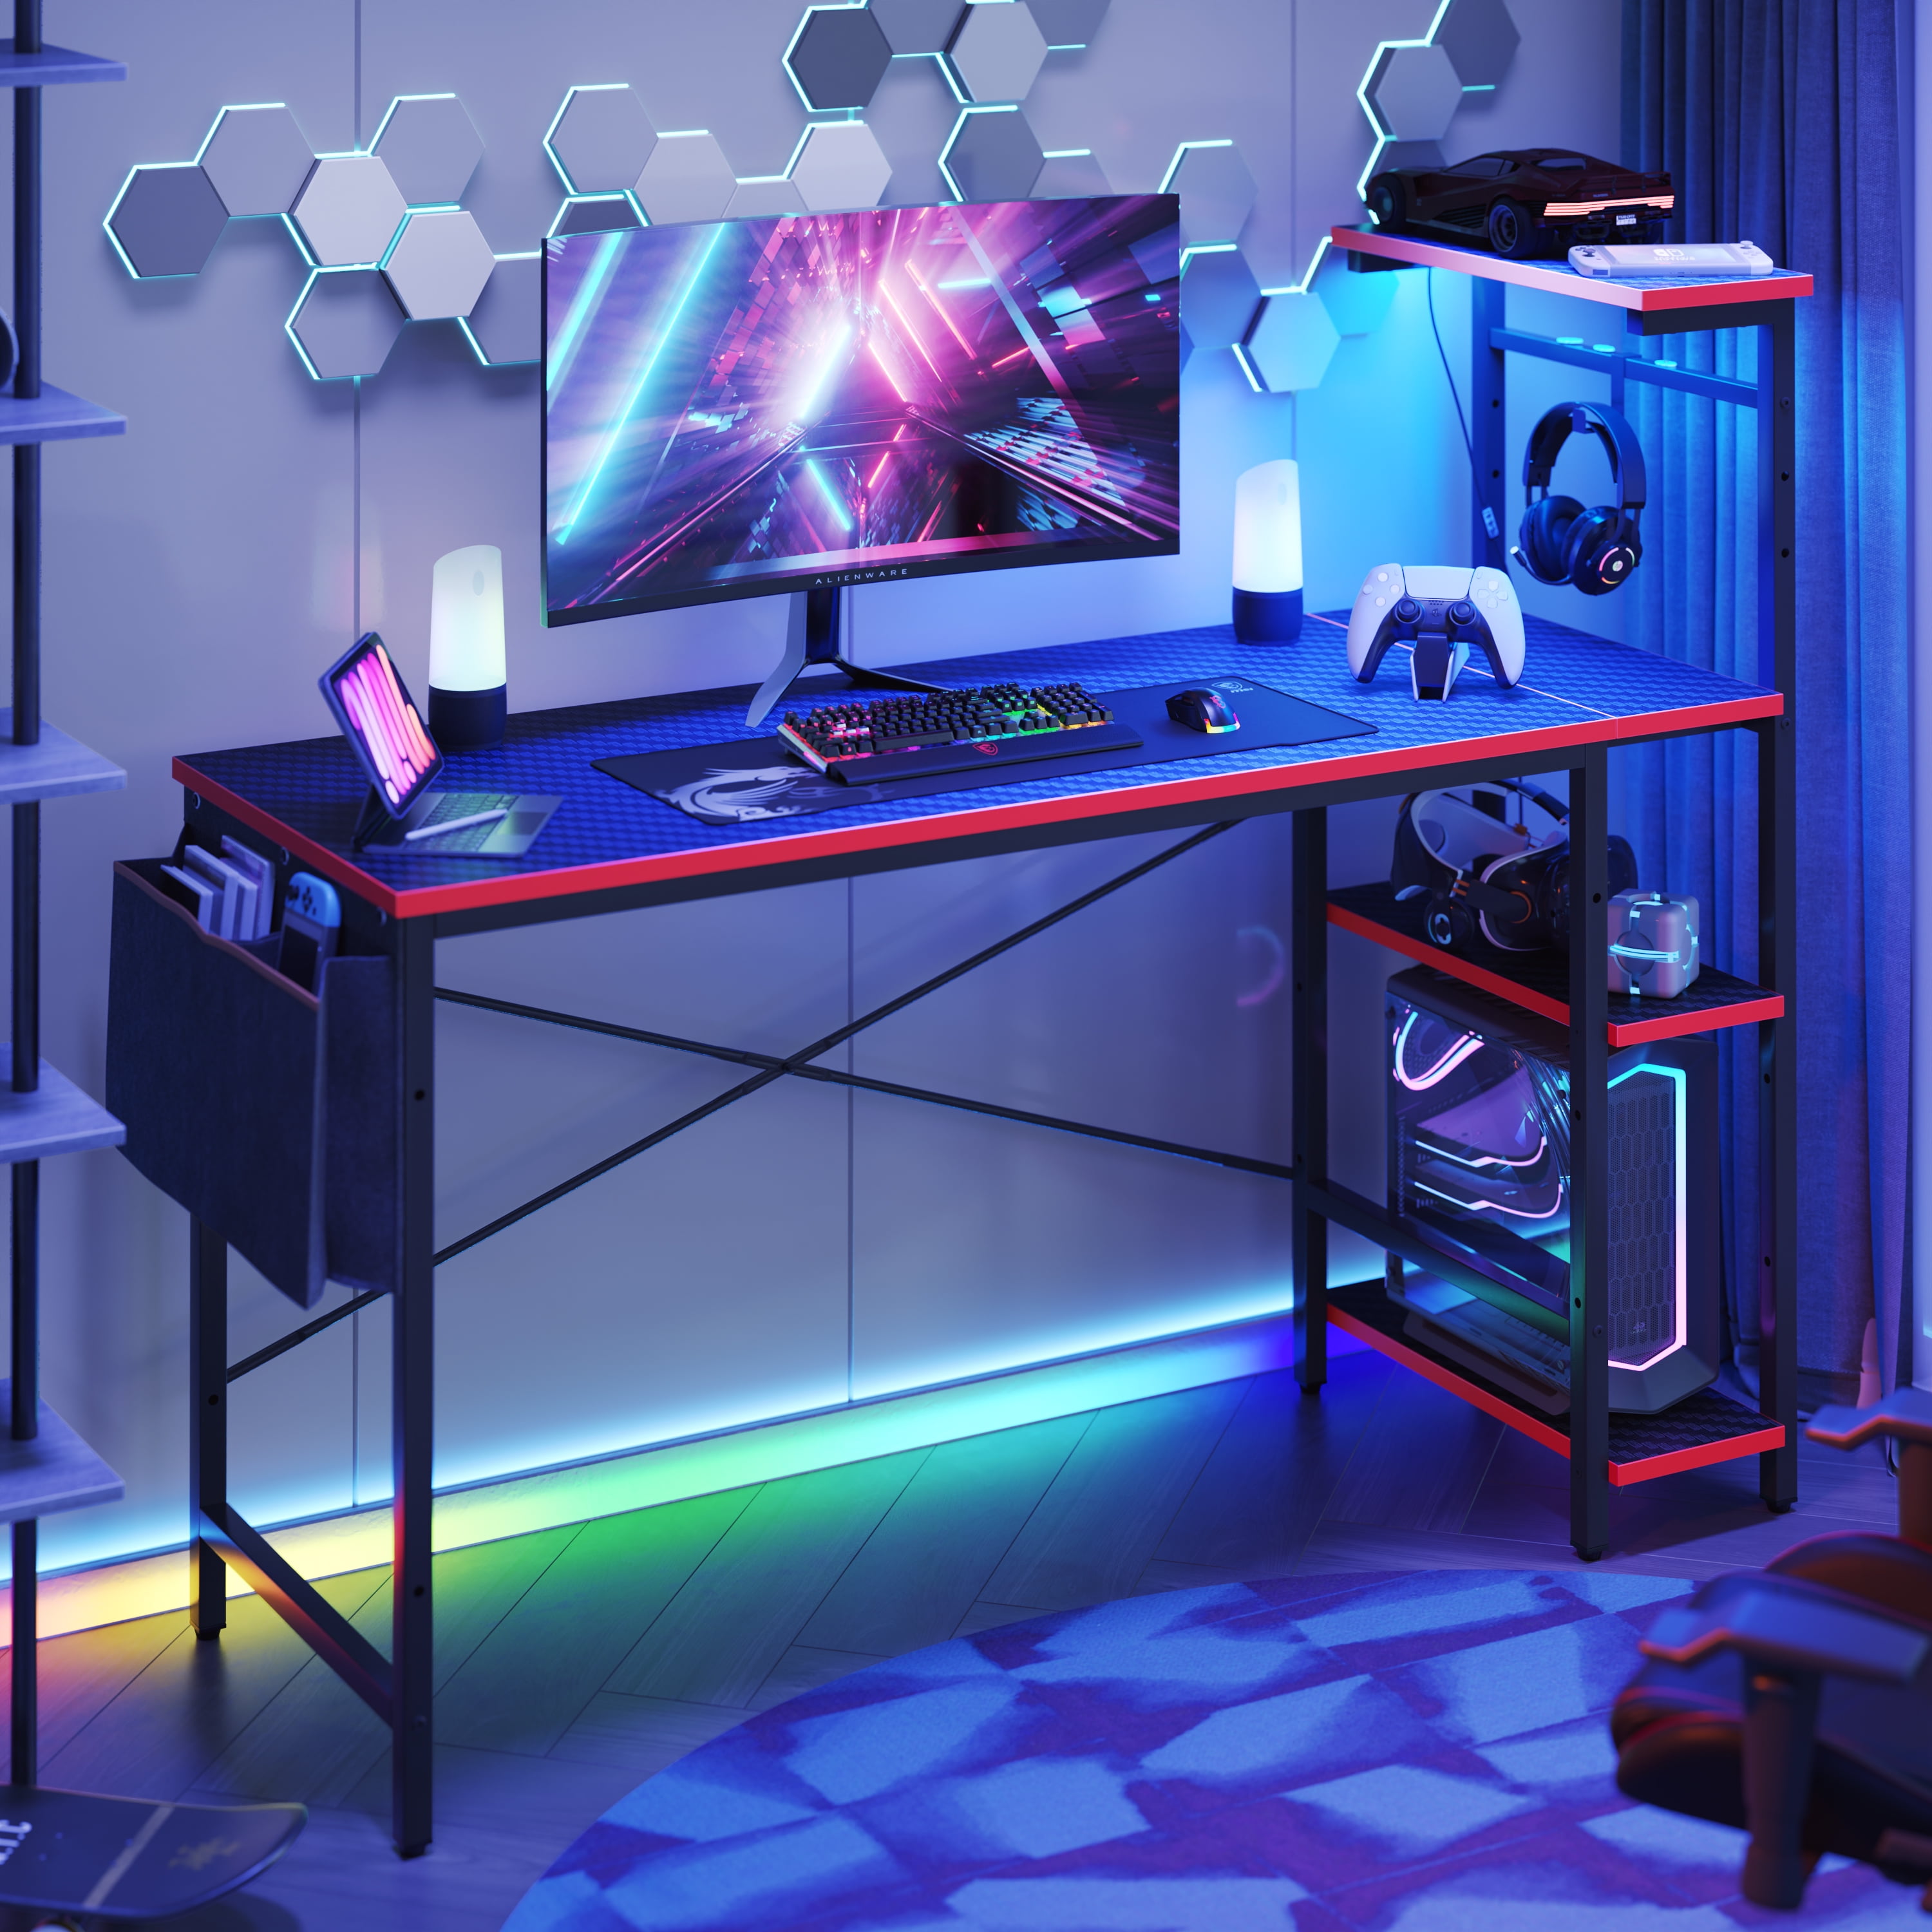 NEW! LED Gaming Table with Carbon Fiber Finish and LED Lighting - Must-Have  from Costco